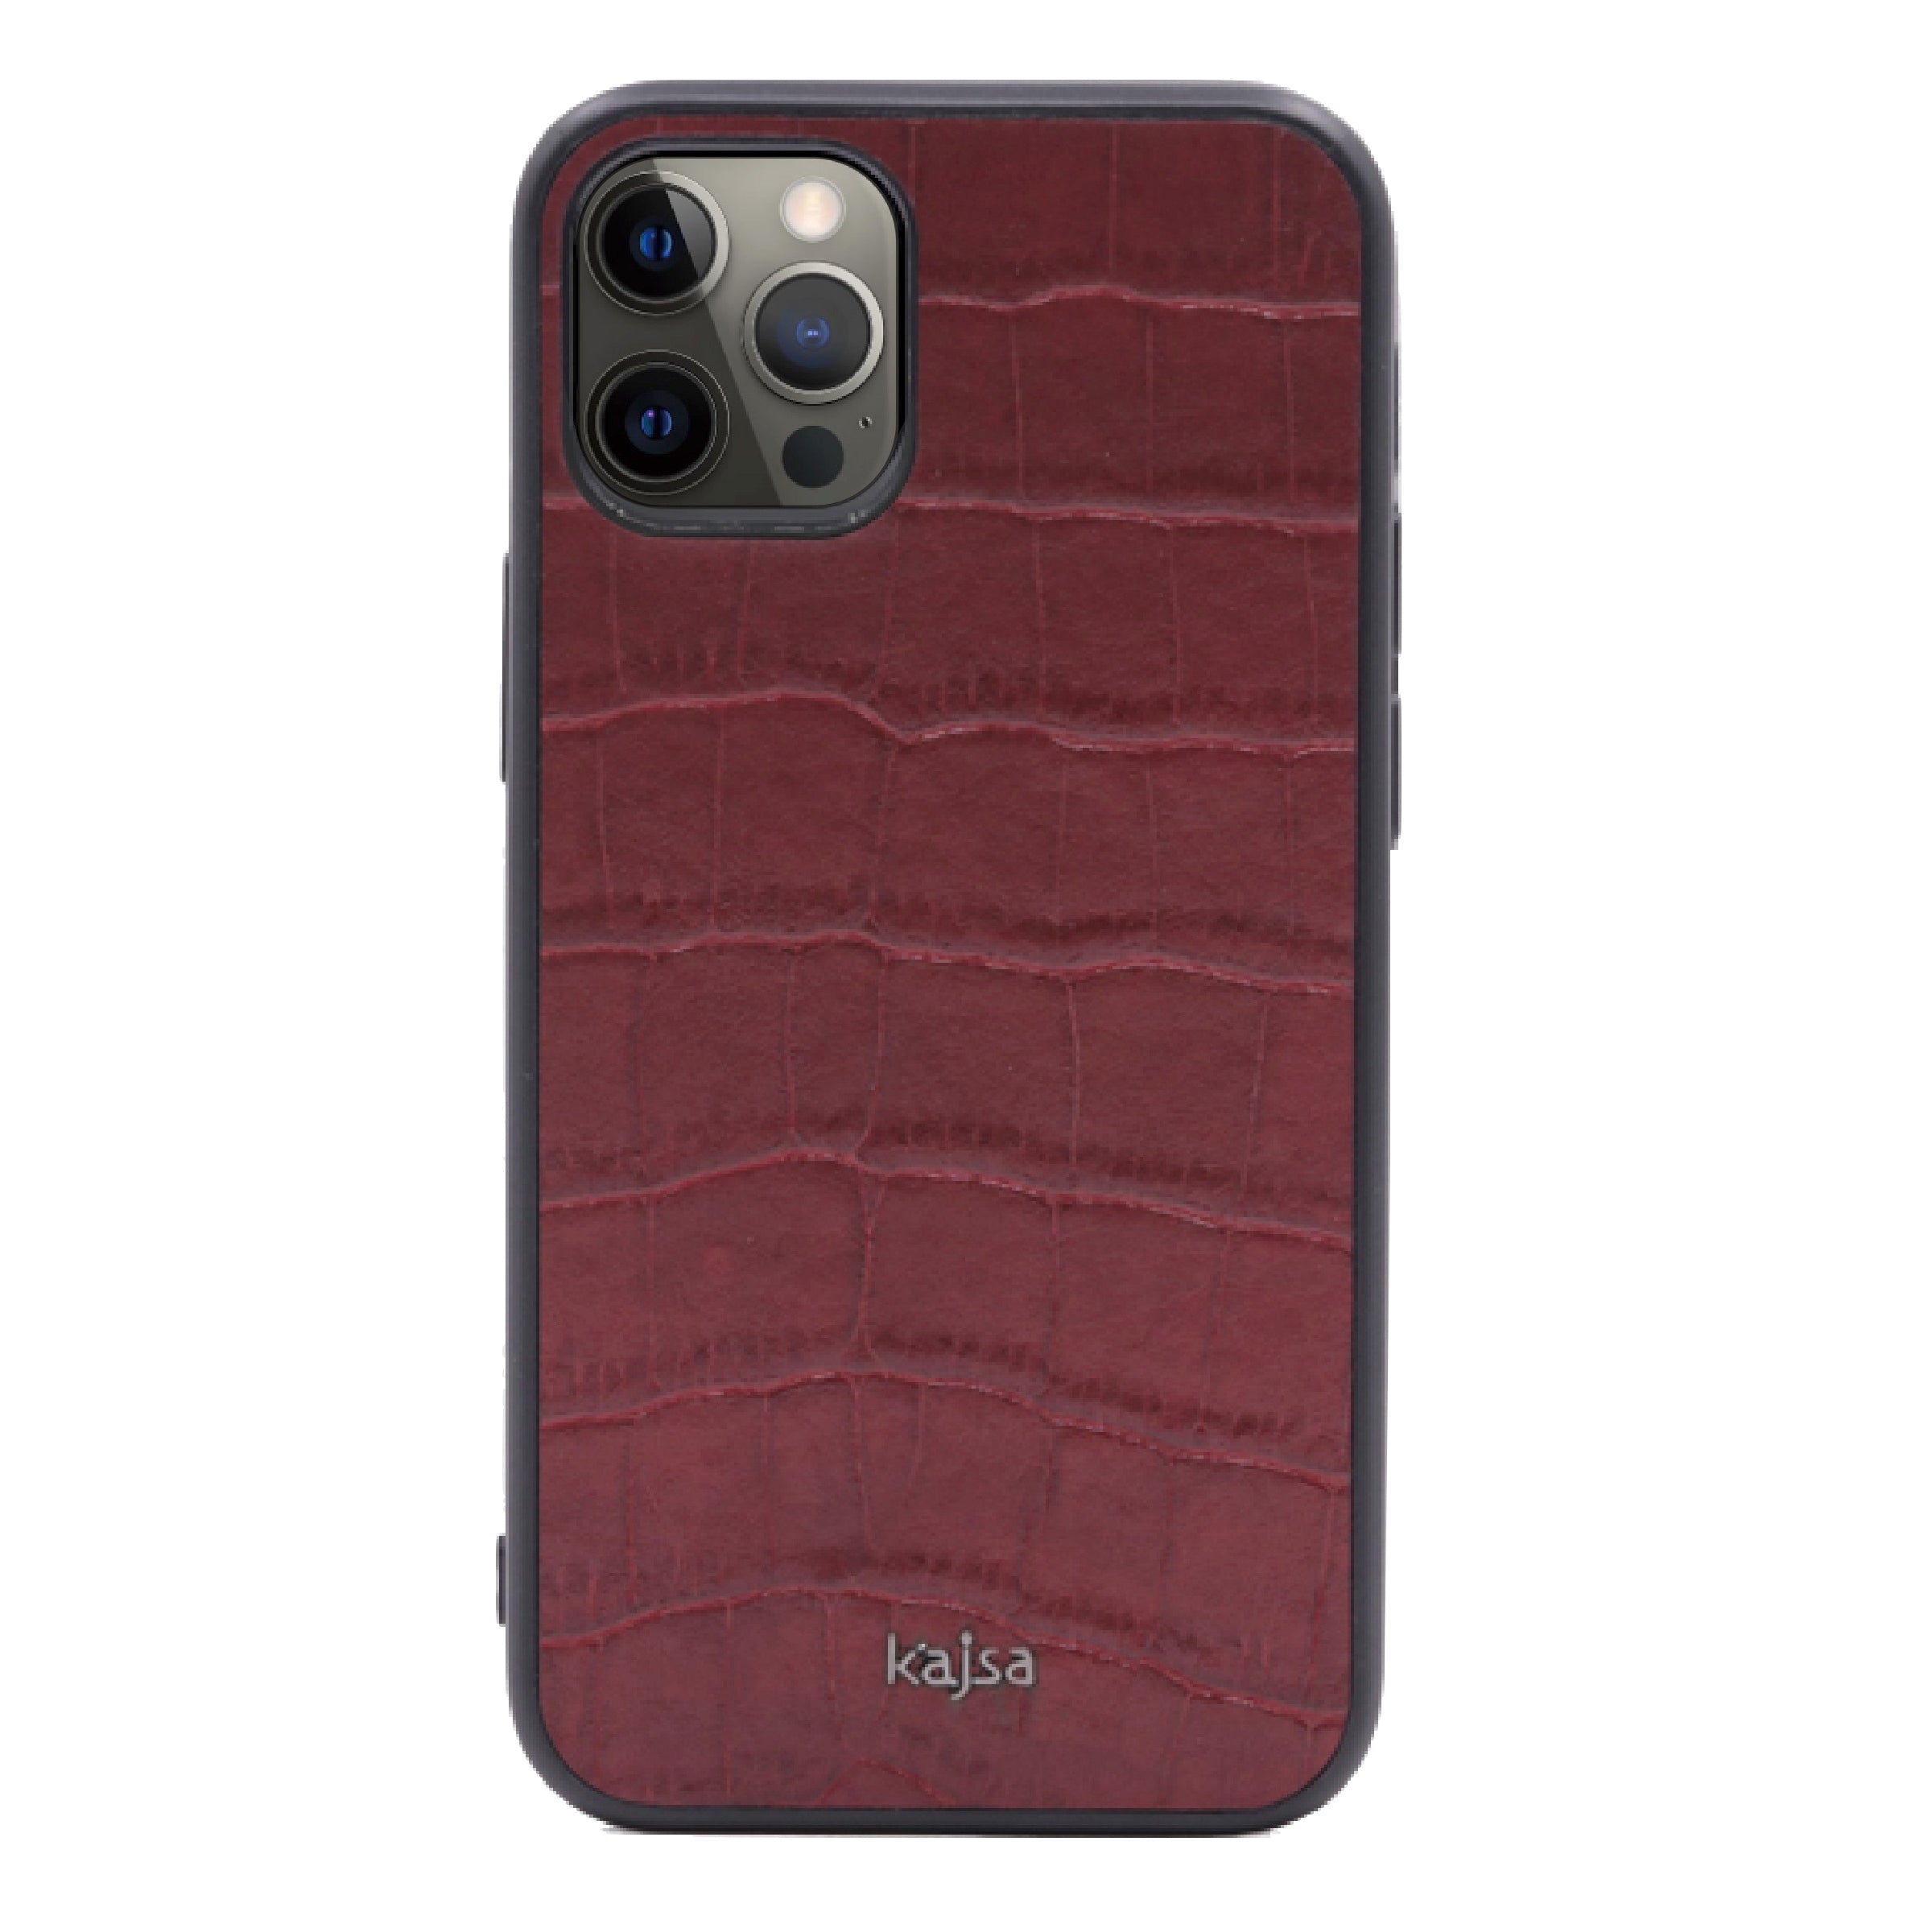 Neo Classic Collection - Genuine Croco Pattern Leather Back Case for iPhone 12-Phone Case- phone case - phone cases- phone cover- iphone cover- iphone case- iphone cases- leather case- leather cases- DIYCASE - custom case - leather cover - hand strap case - croco pattern case - snake pattern case - carbon fiber phone case - phone case brand - unique phone case - high quality - phone case brand - protective case - buy phone case hong kong - online buy phone case - iphone‎手機殼 - 客製化手機殼 - samsung ‎手機殼 - 香港手機殼 -